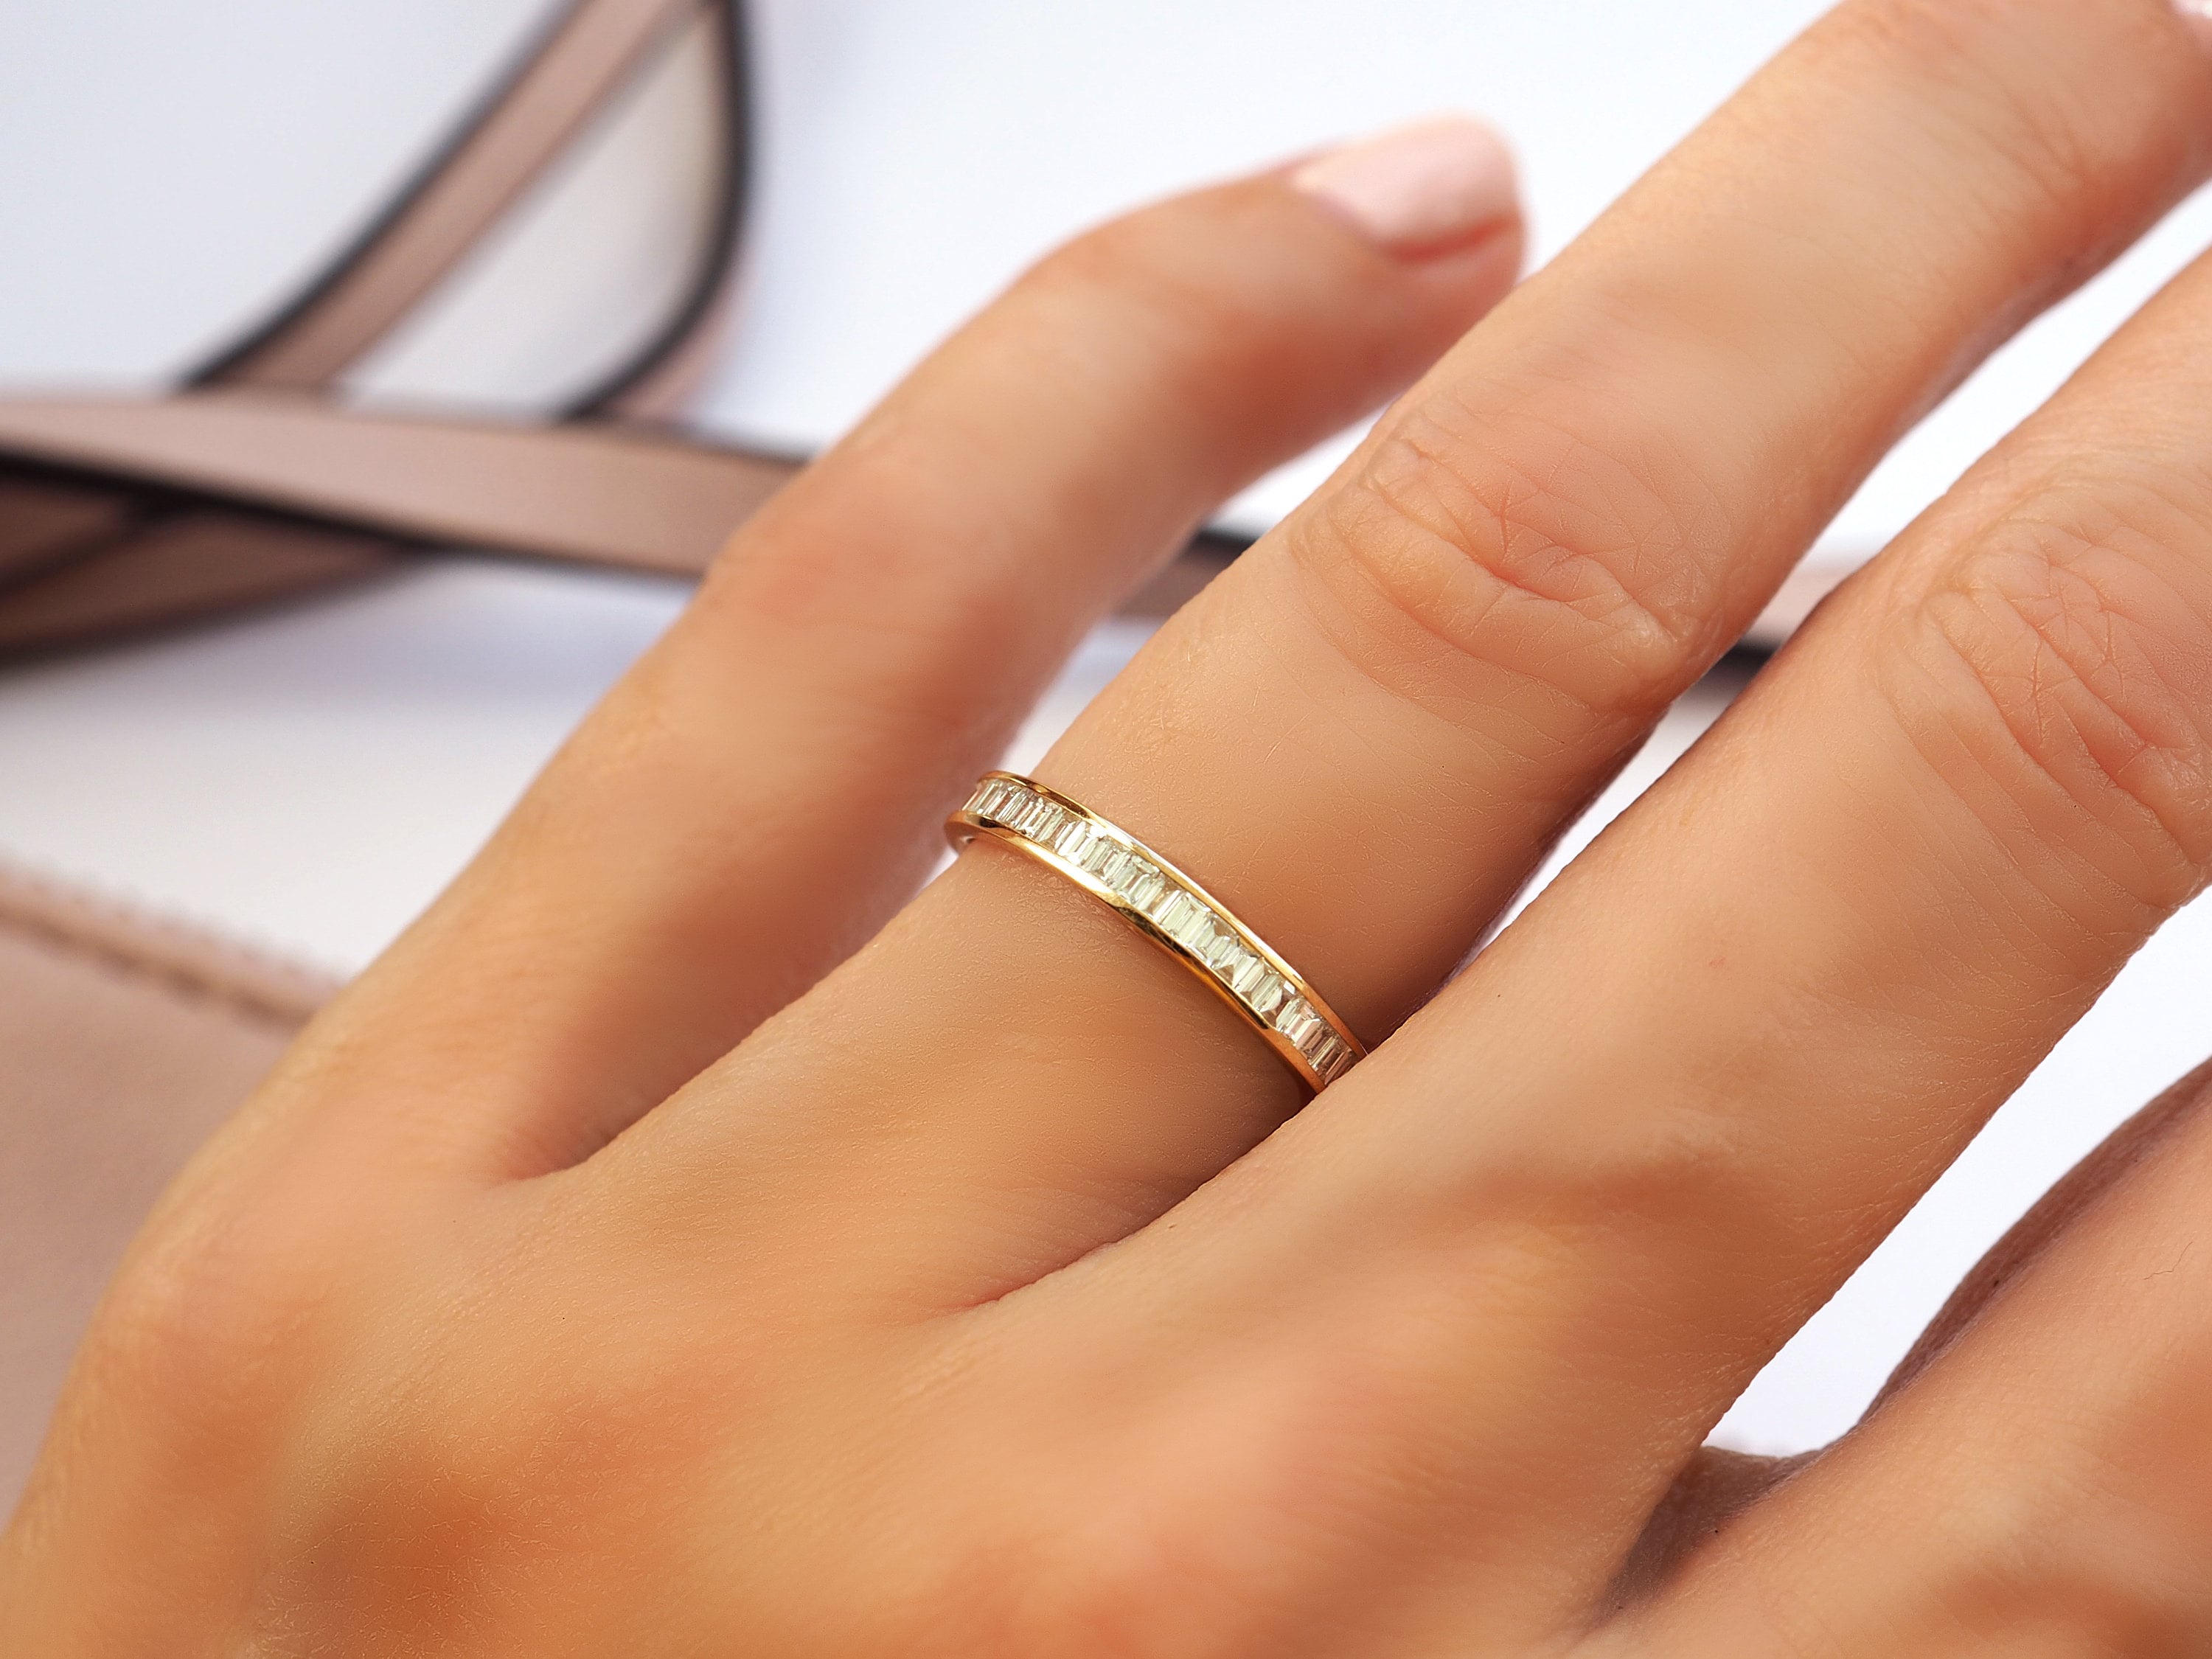 Channel Statement Ring with Baguette Cut Diamonds